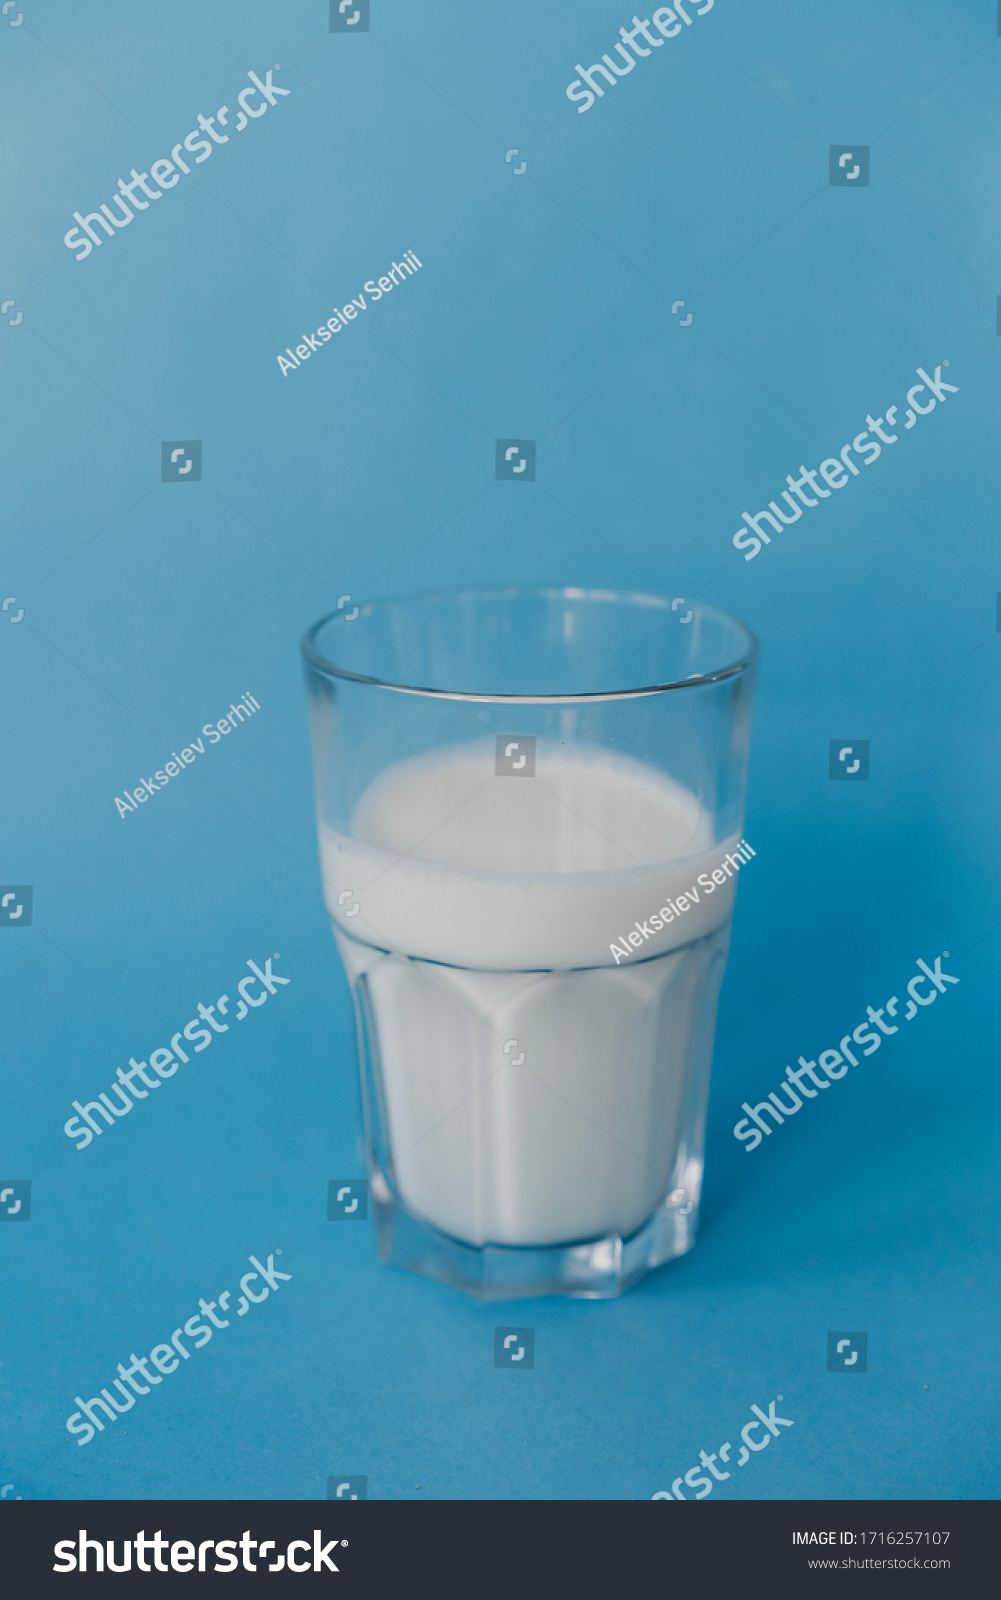 in a transparent glass with milk on a blue background
 #1716257107